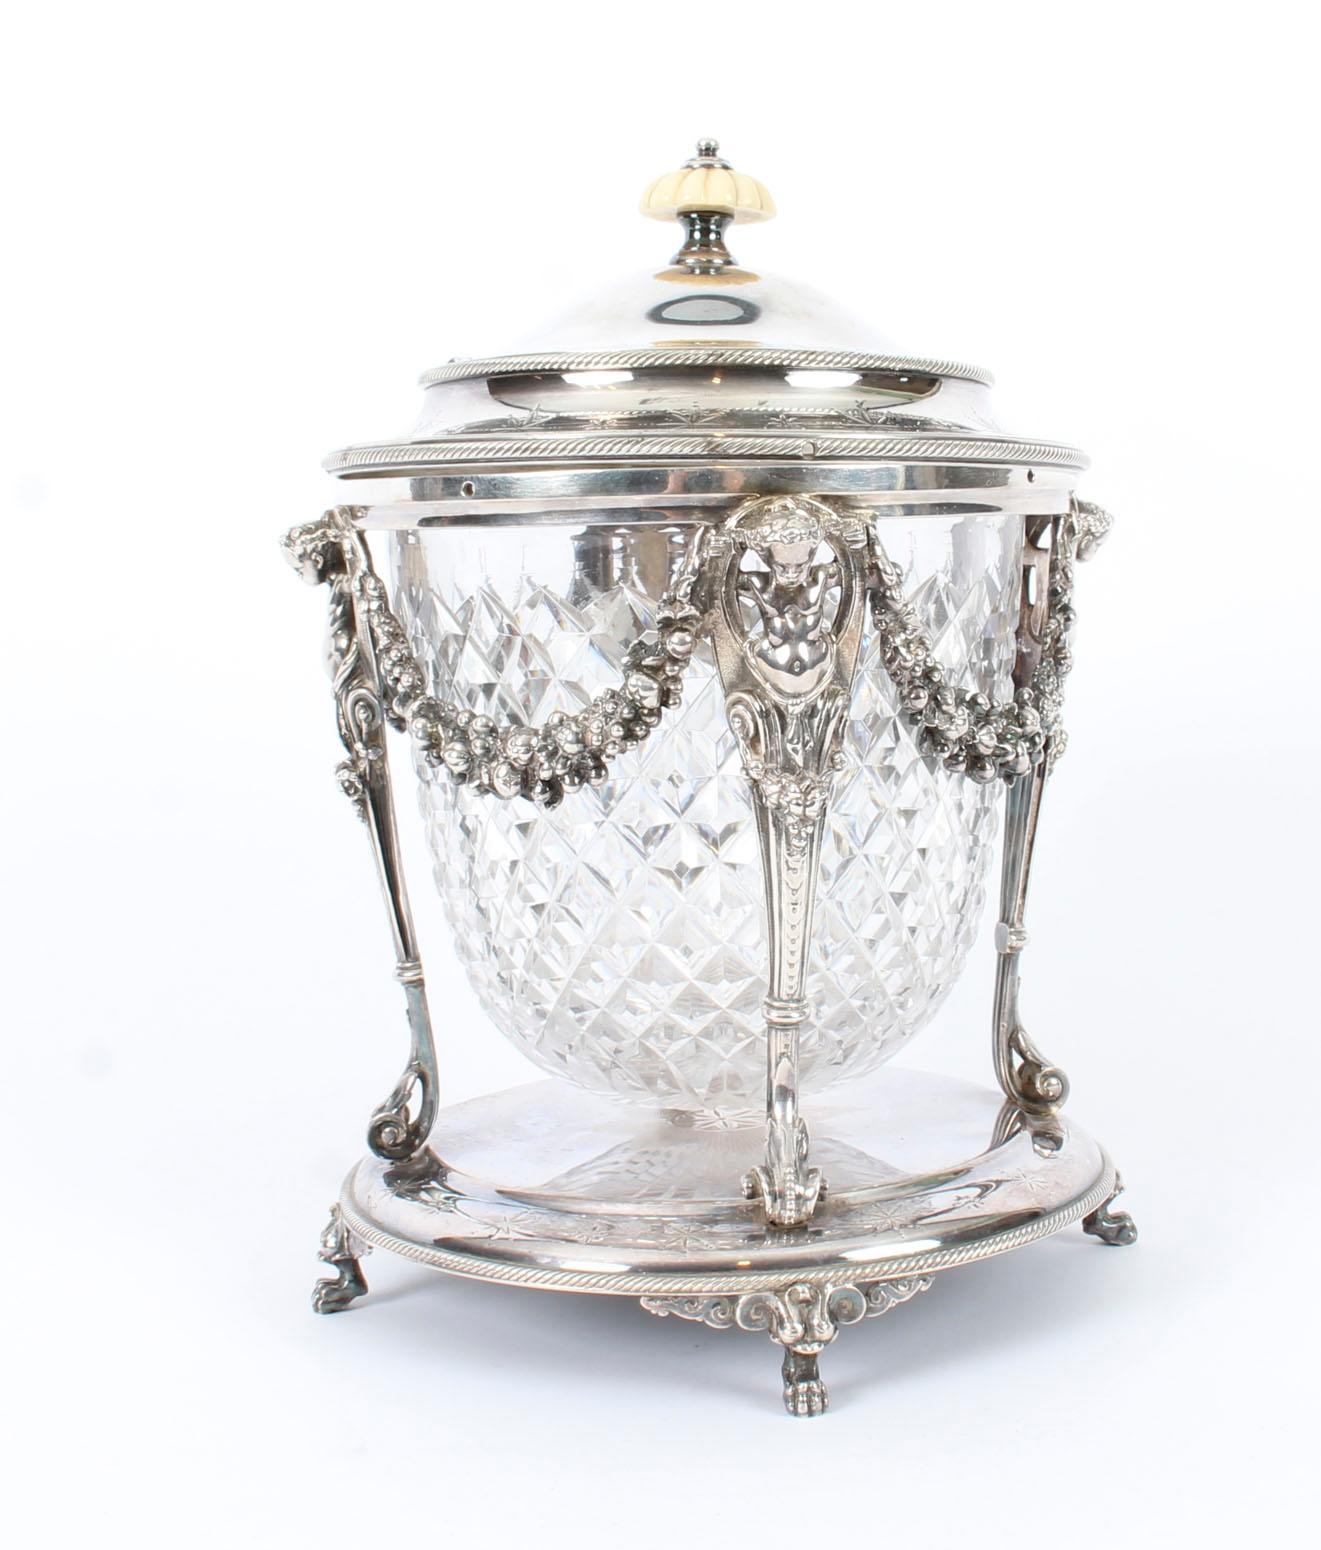 Victorian Silver Plate & Cut Glass Biscuit Barrel by Elkington 19th Century 15